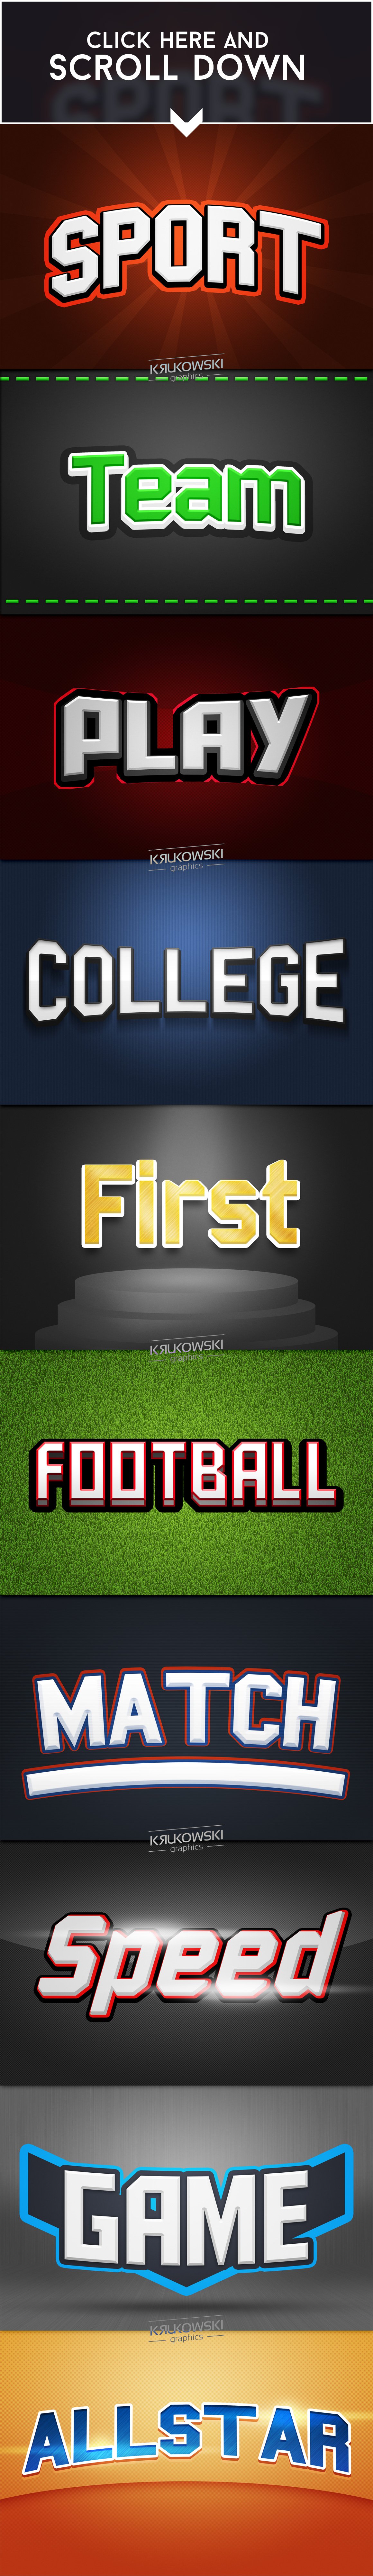 Sport Text Effects Mockuppreview image.